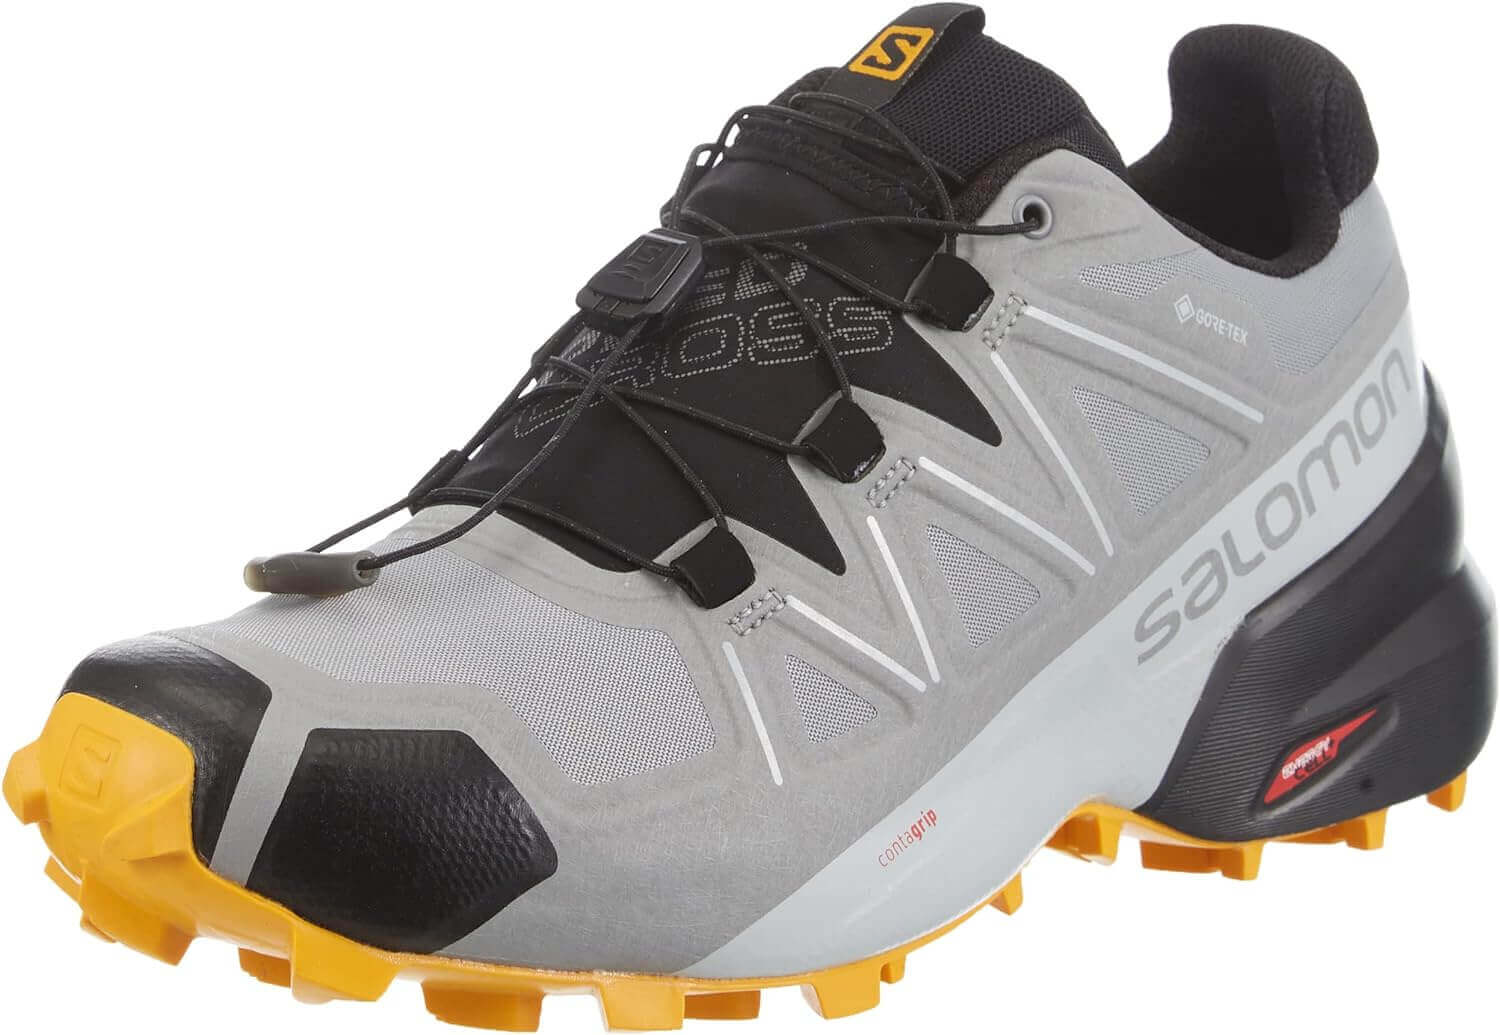 Shop The Latest >Salomon Men's Speedcross 5 GORE-TEX Trail Running Shoes > *Only $223.93*> From The Top Brand > *Salomonl* > Shop Now and Get Free Shipping On Orders Over $45.00 >*Shop Earth Foot*